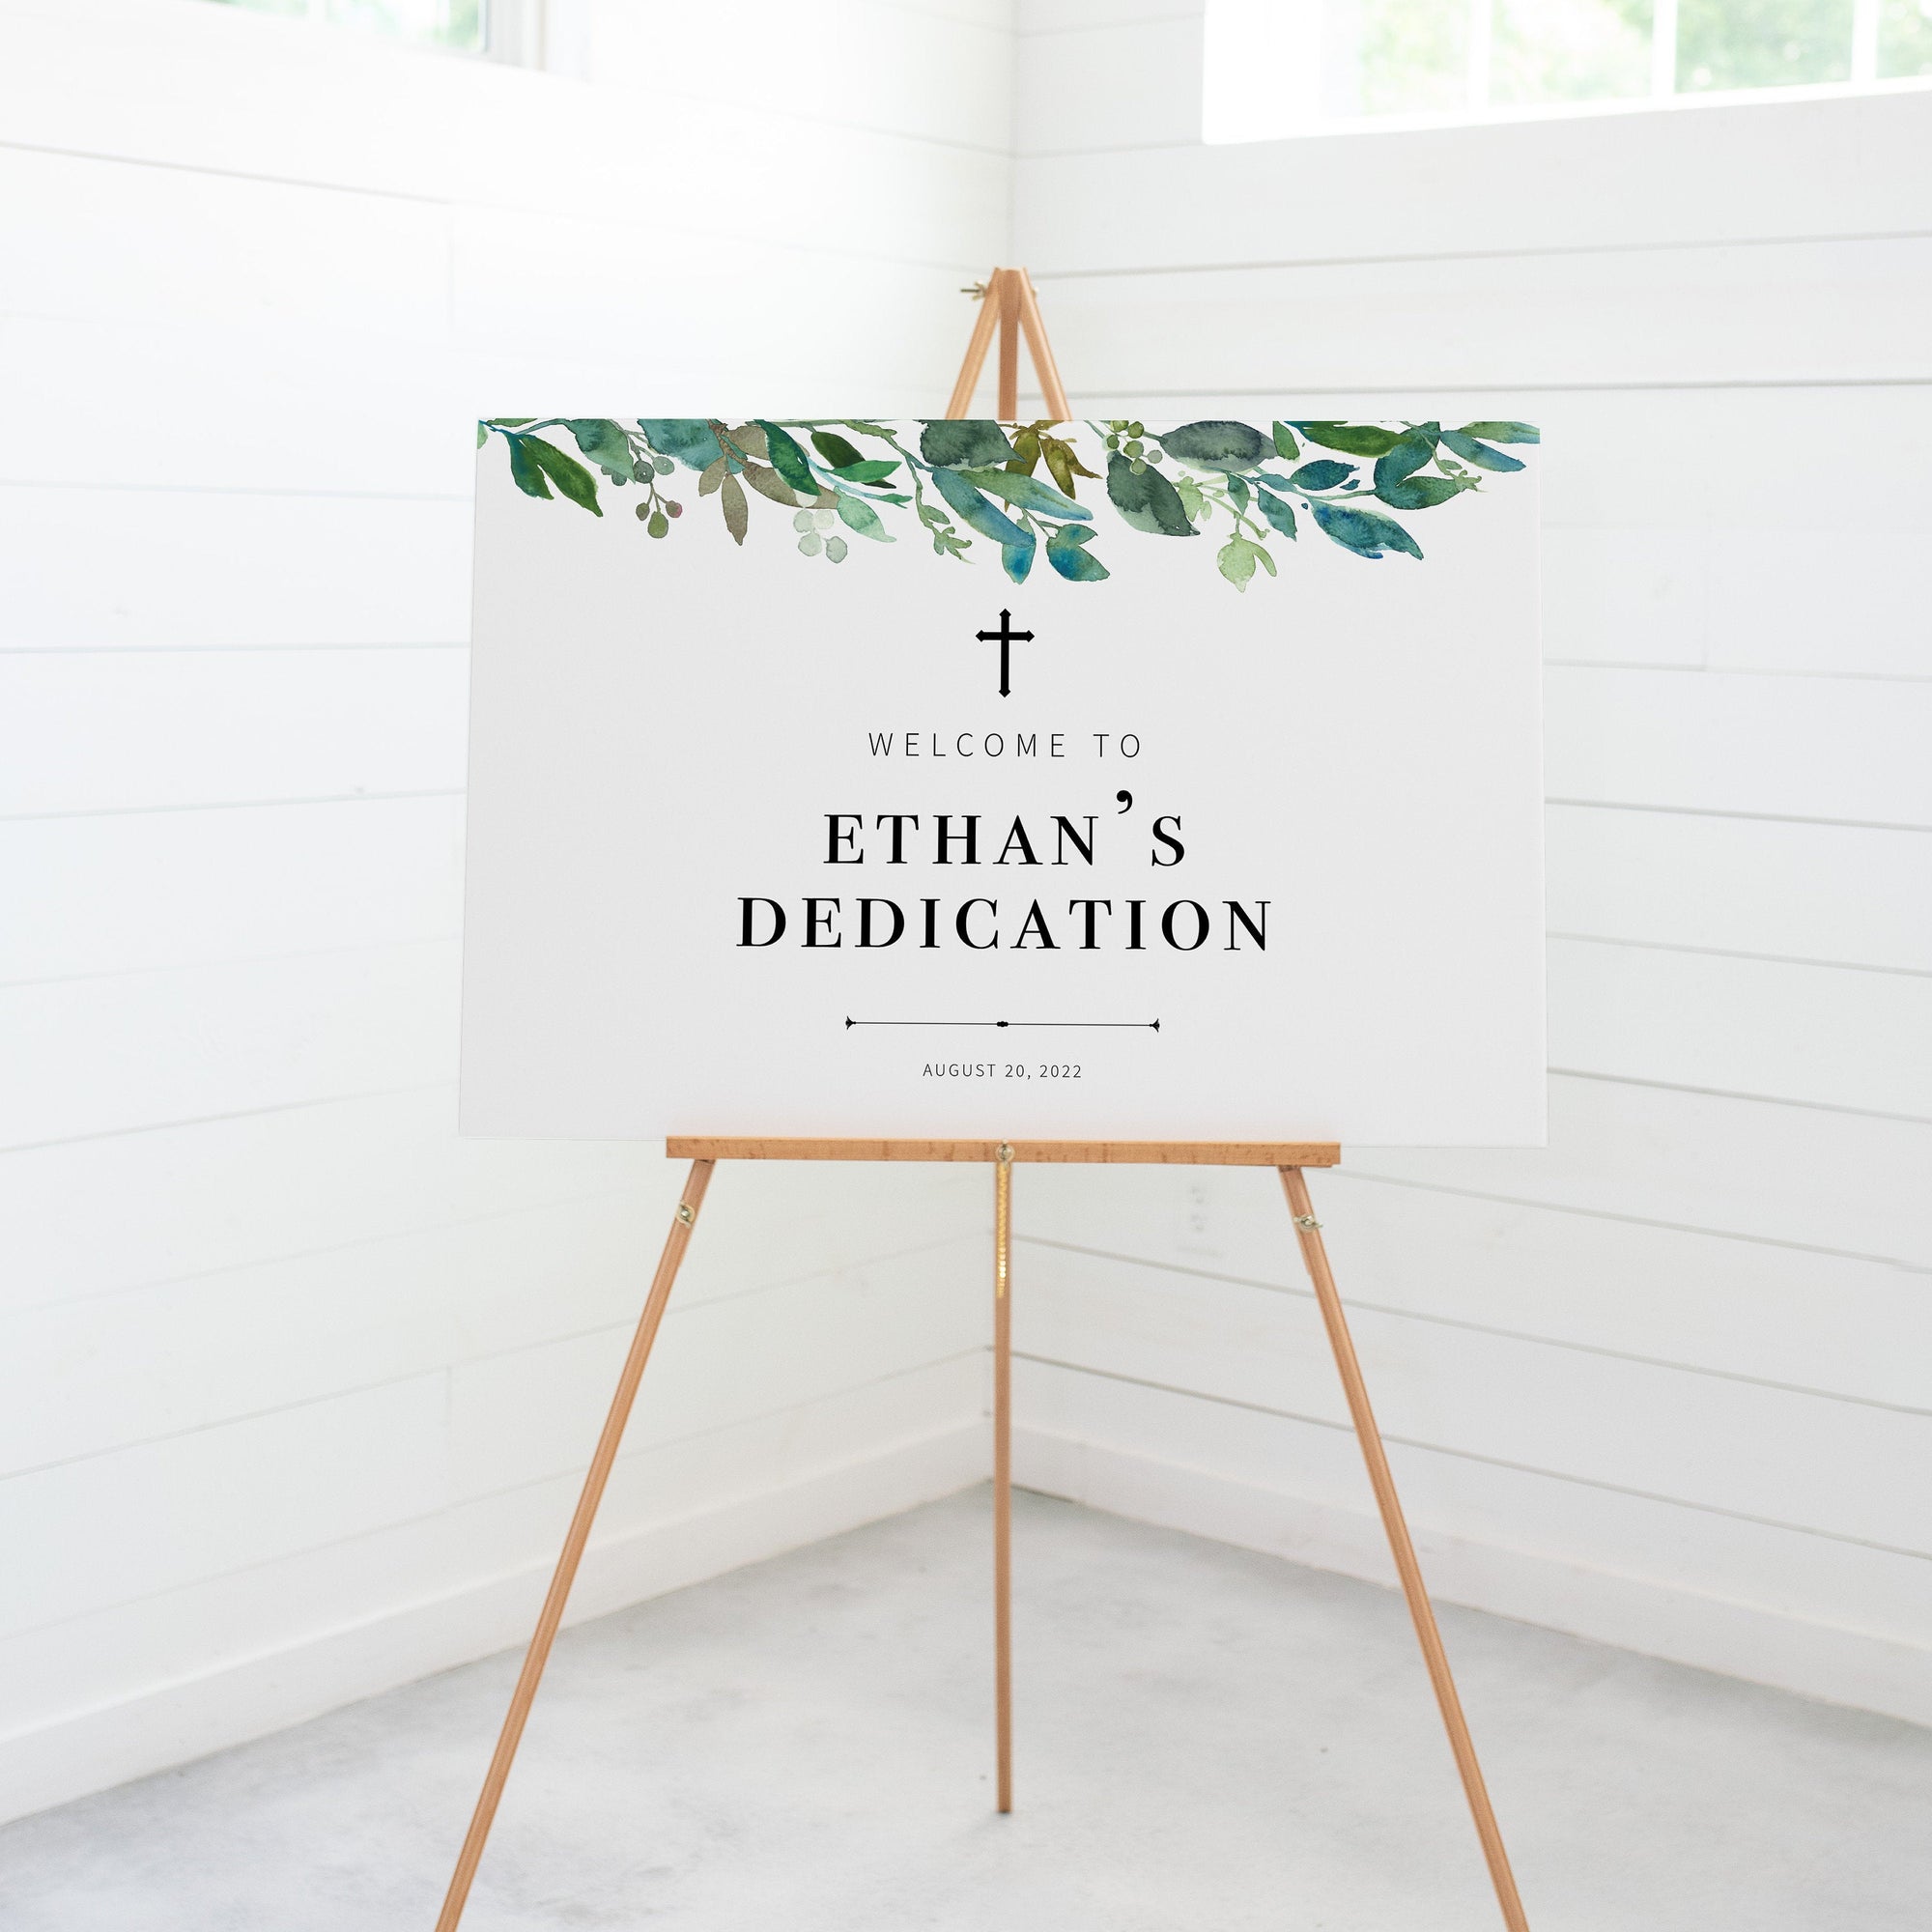 Greenery Baby Dedication Welcome Sign Template, Large Welcome Sign Printable, Boy Dedication Decorations Greenery, INSTANT DOWNLOAD - G100